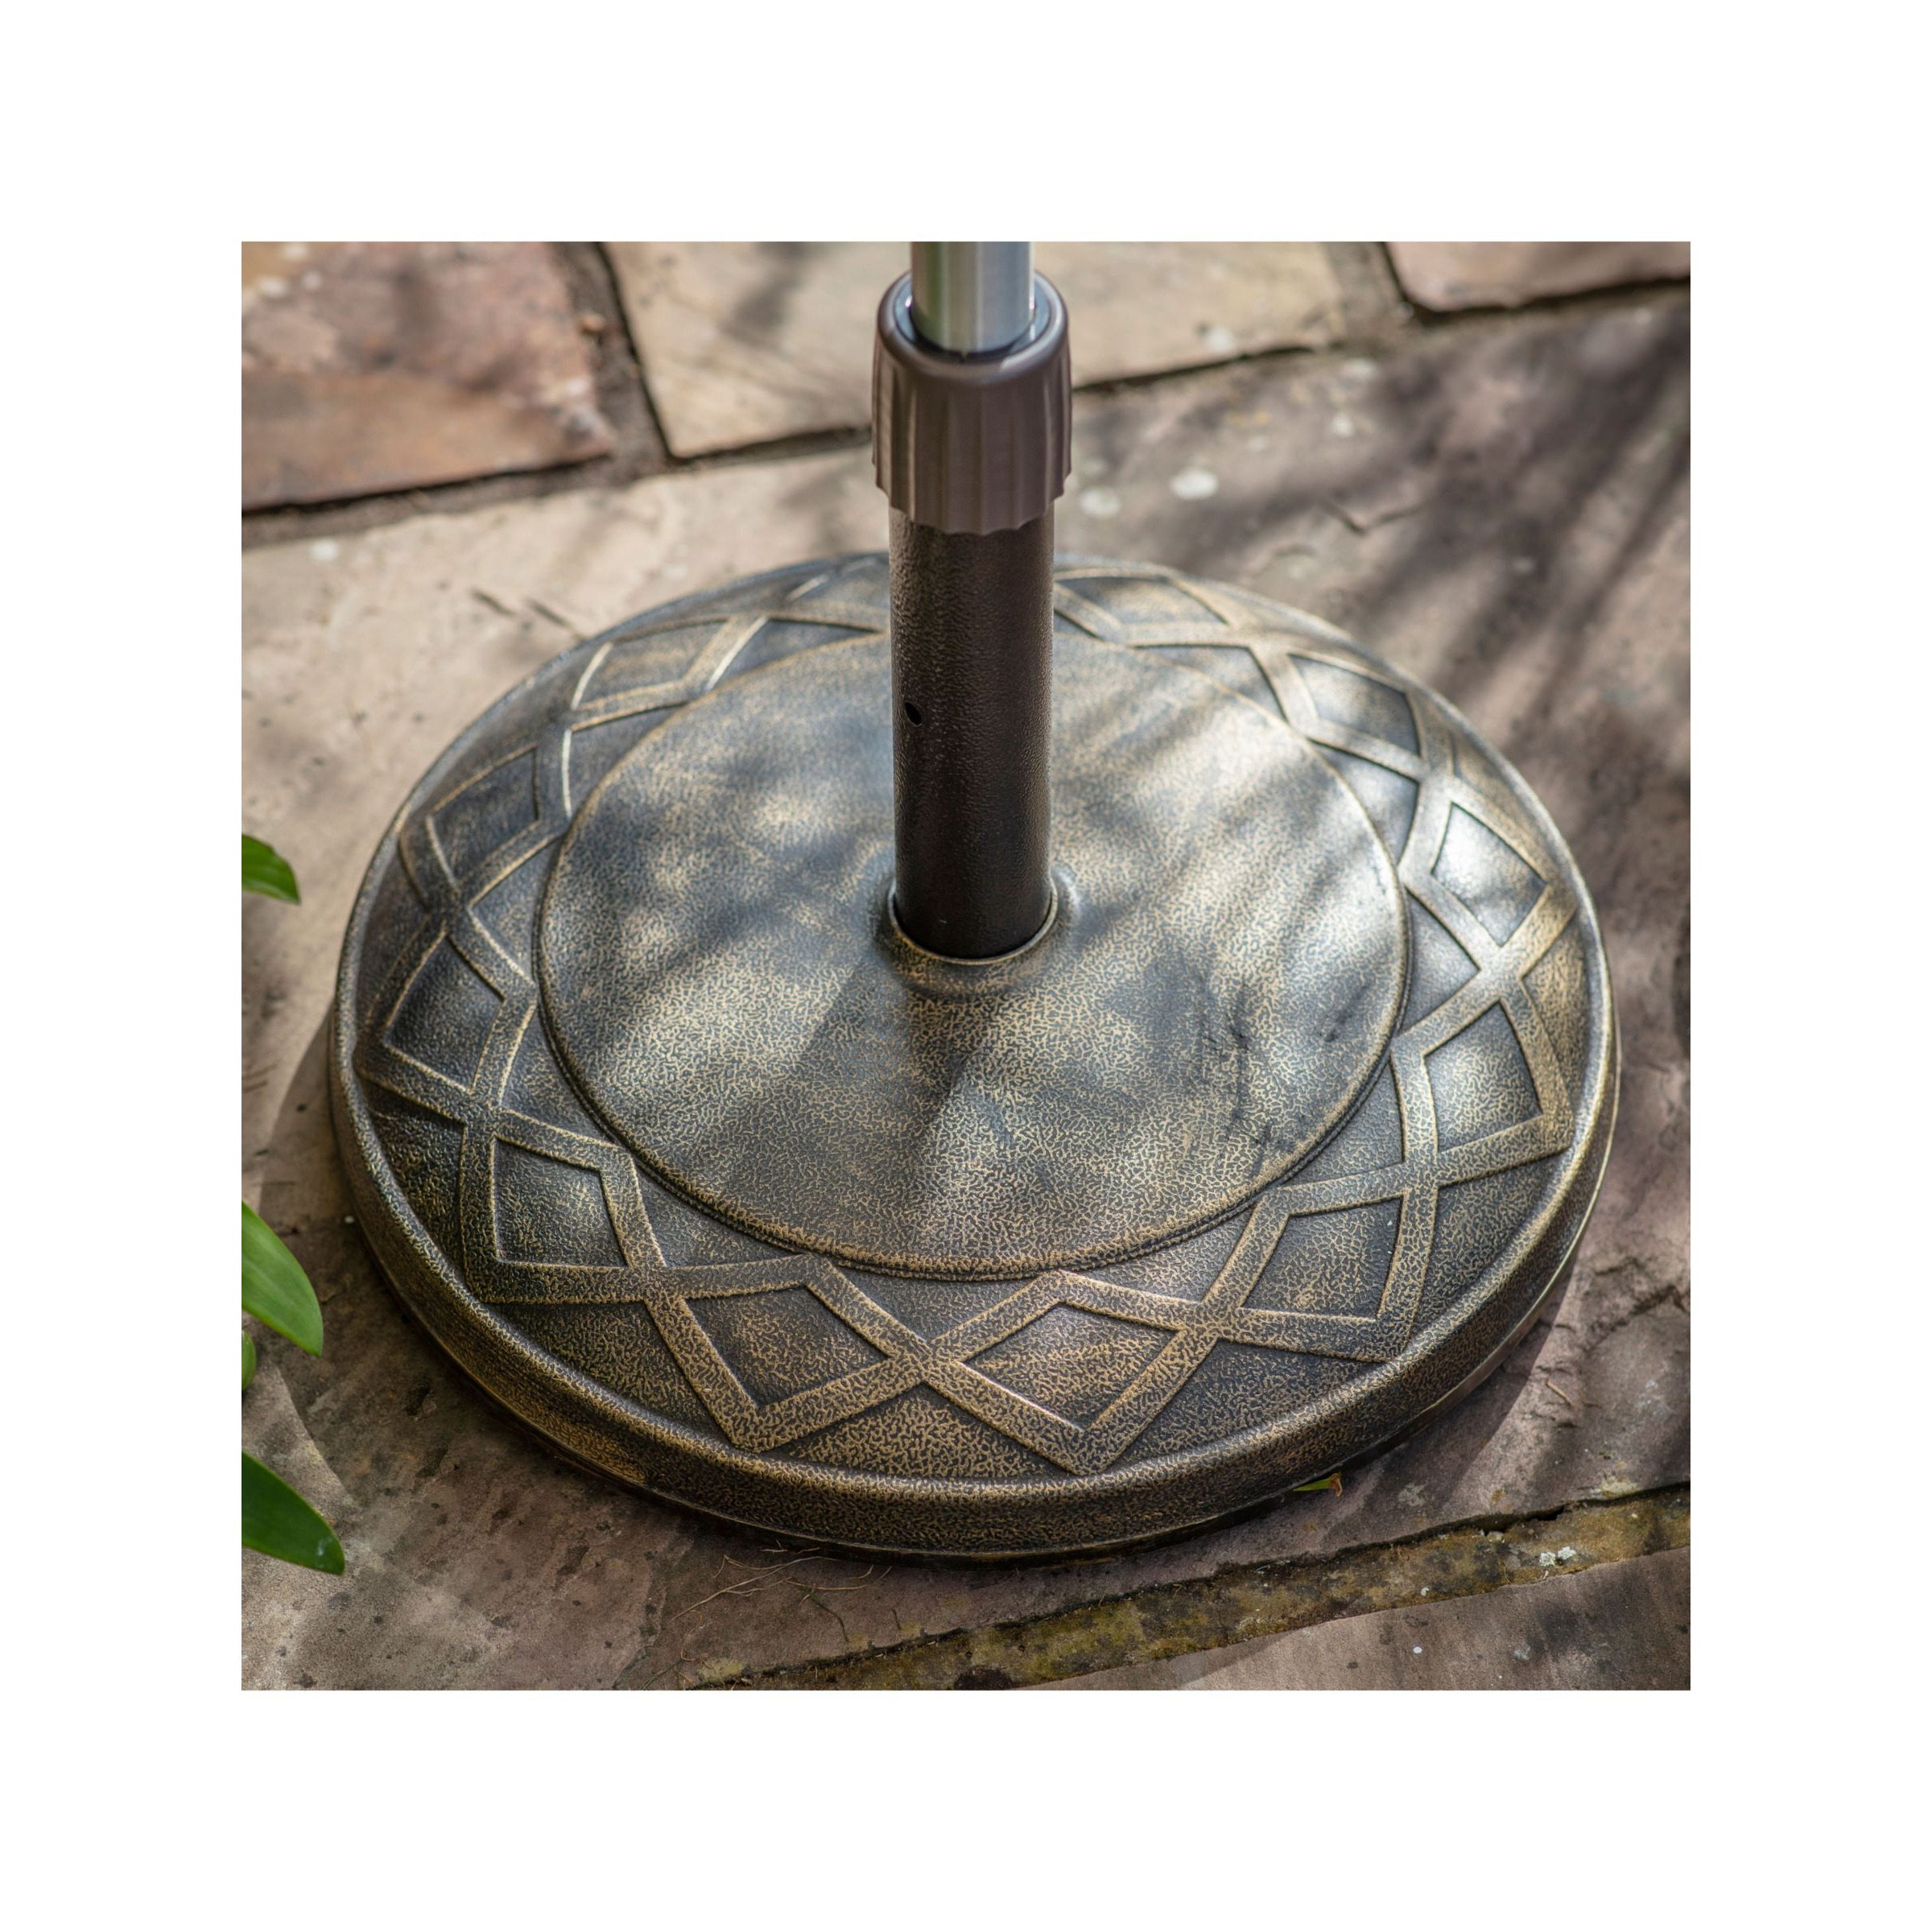 Gallery Direct Viali Parasol Base Weight, 20kg, Aged Brass - image 1